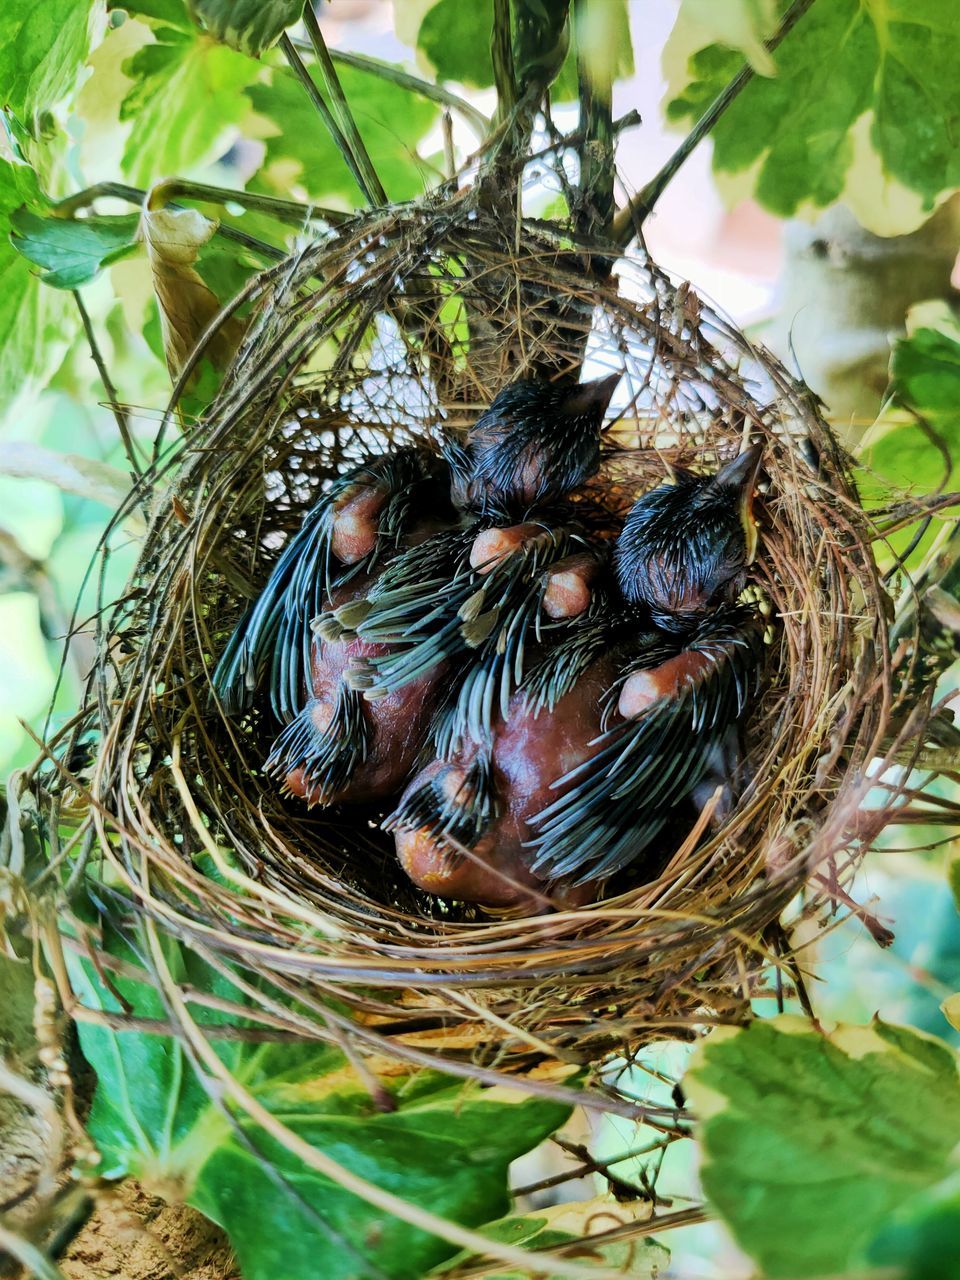 bird nest, nest, animal nest, bird, animal, animal themes, branch, nature, plant, animal wildlife, leaf, plant part, wildlife, no people, tree, group of animals, day, outdoors, close-up, young animal, beginnings, young bird, growth, food